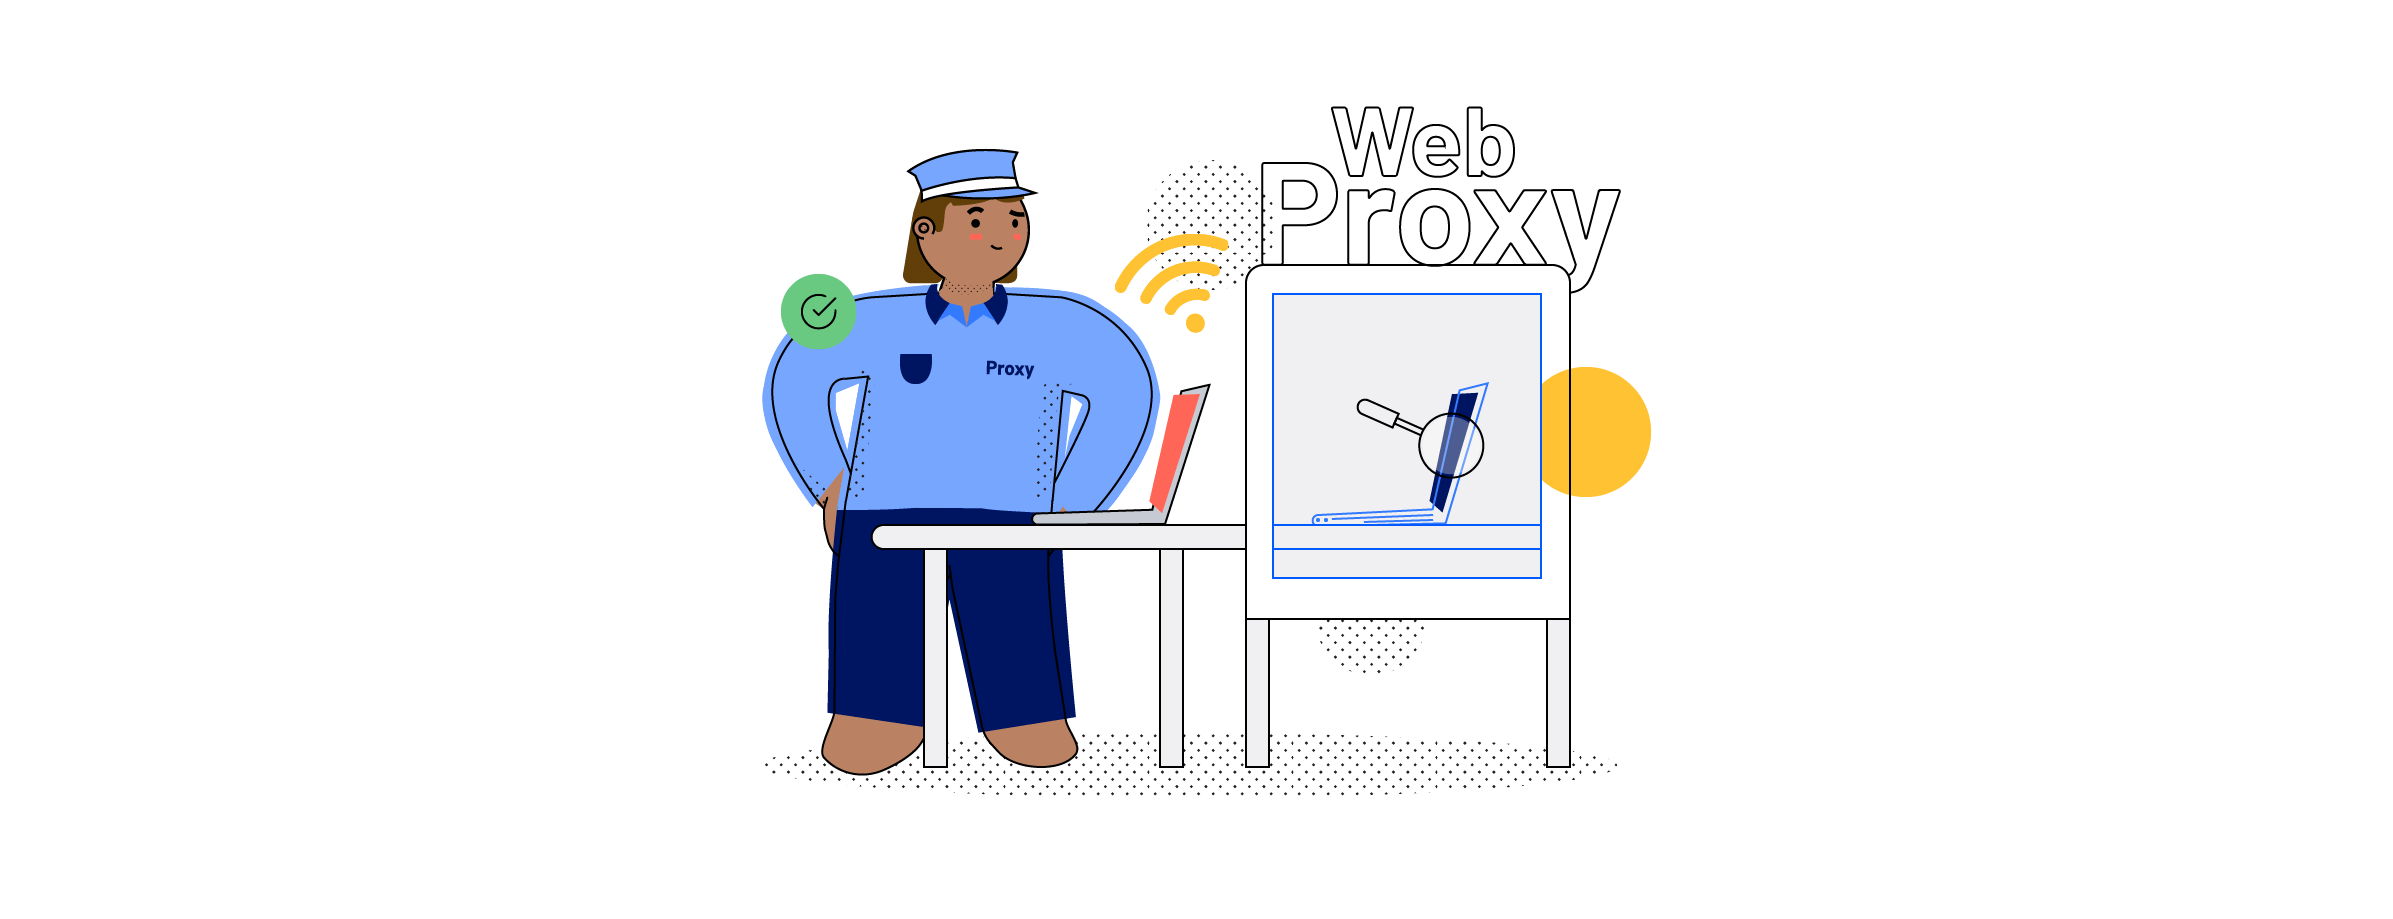 proxy filters internet access